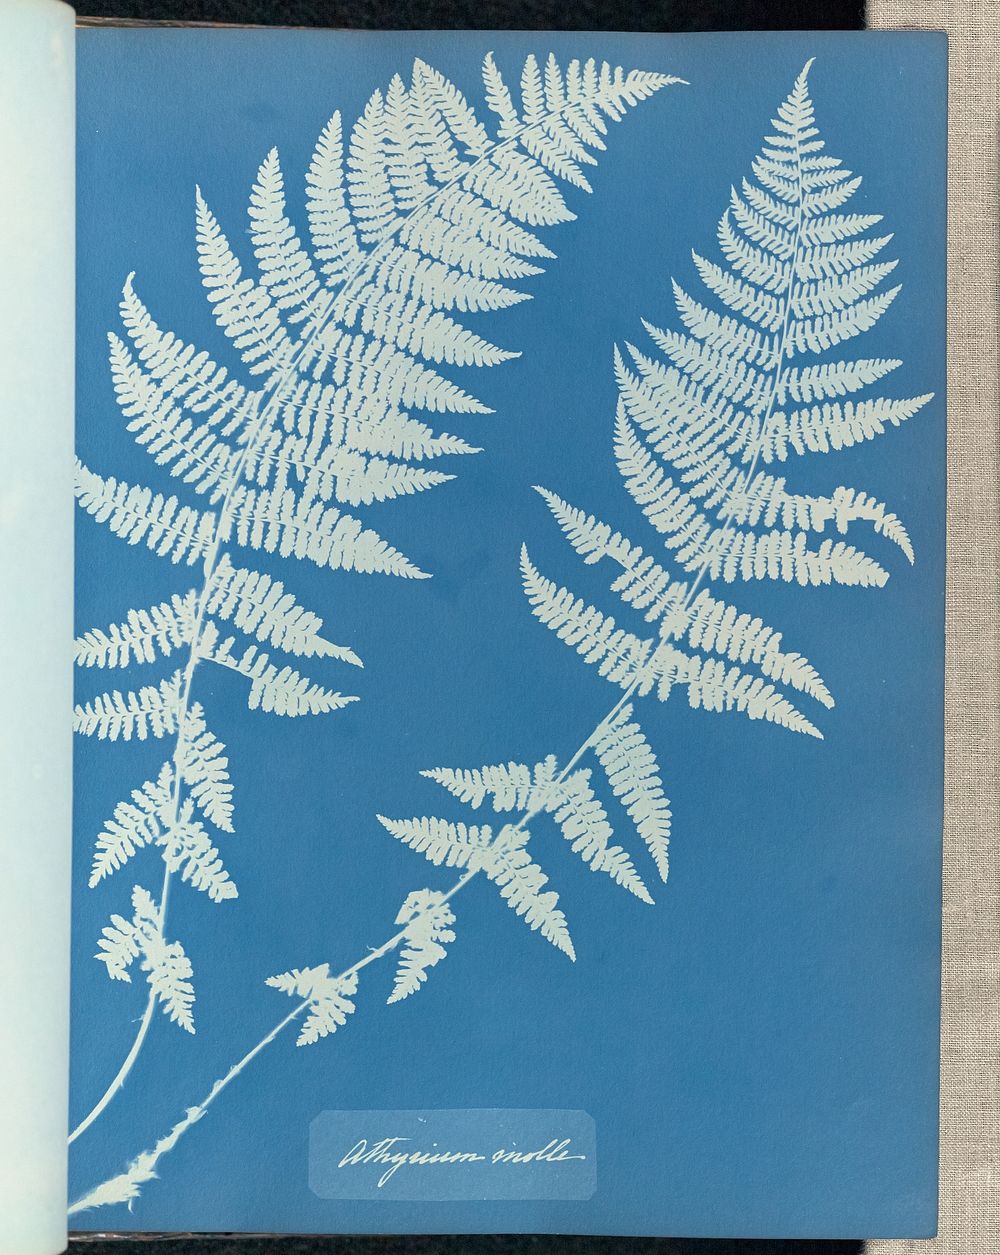 Athyrium molle by Anna Atkins and Anne Dixon